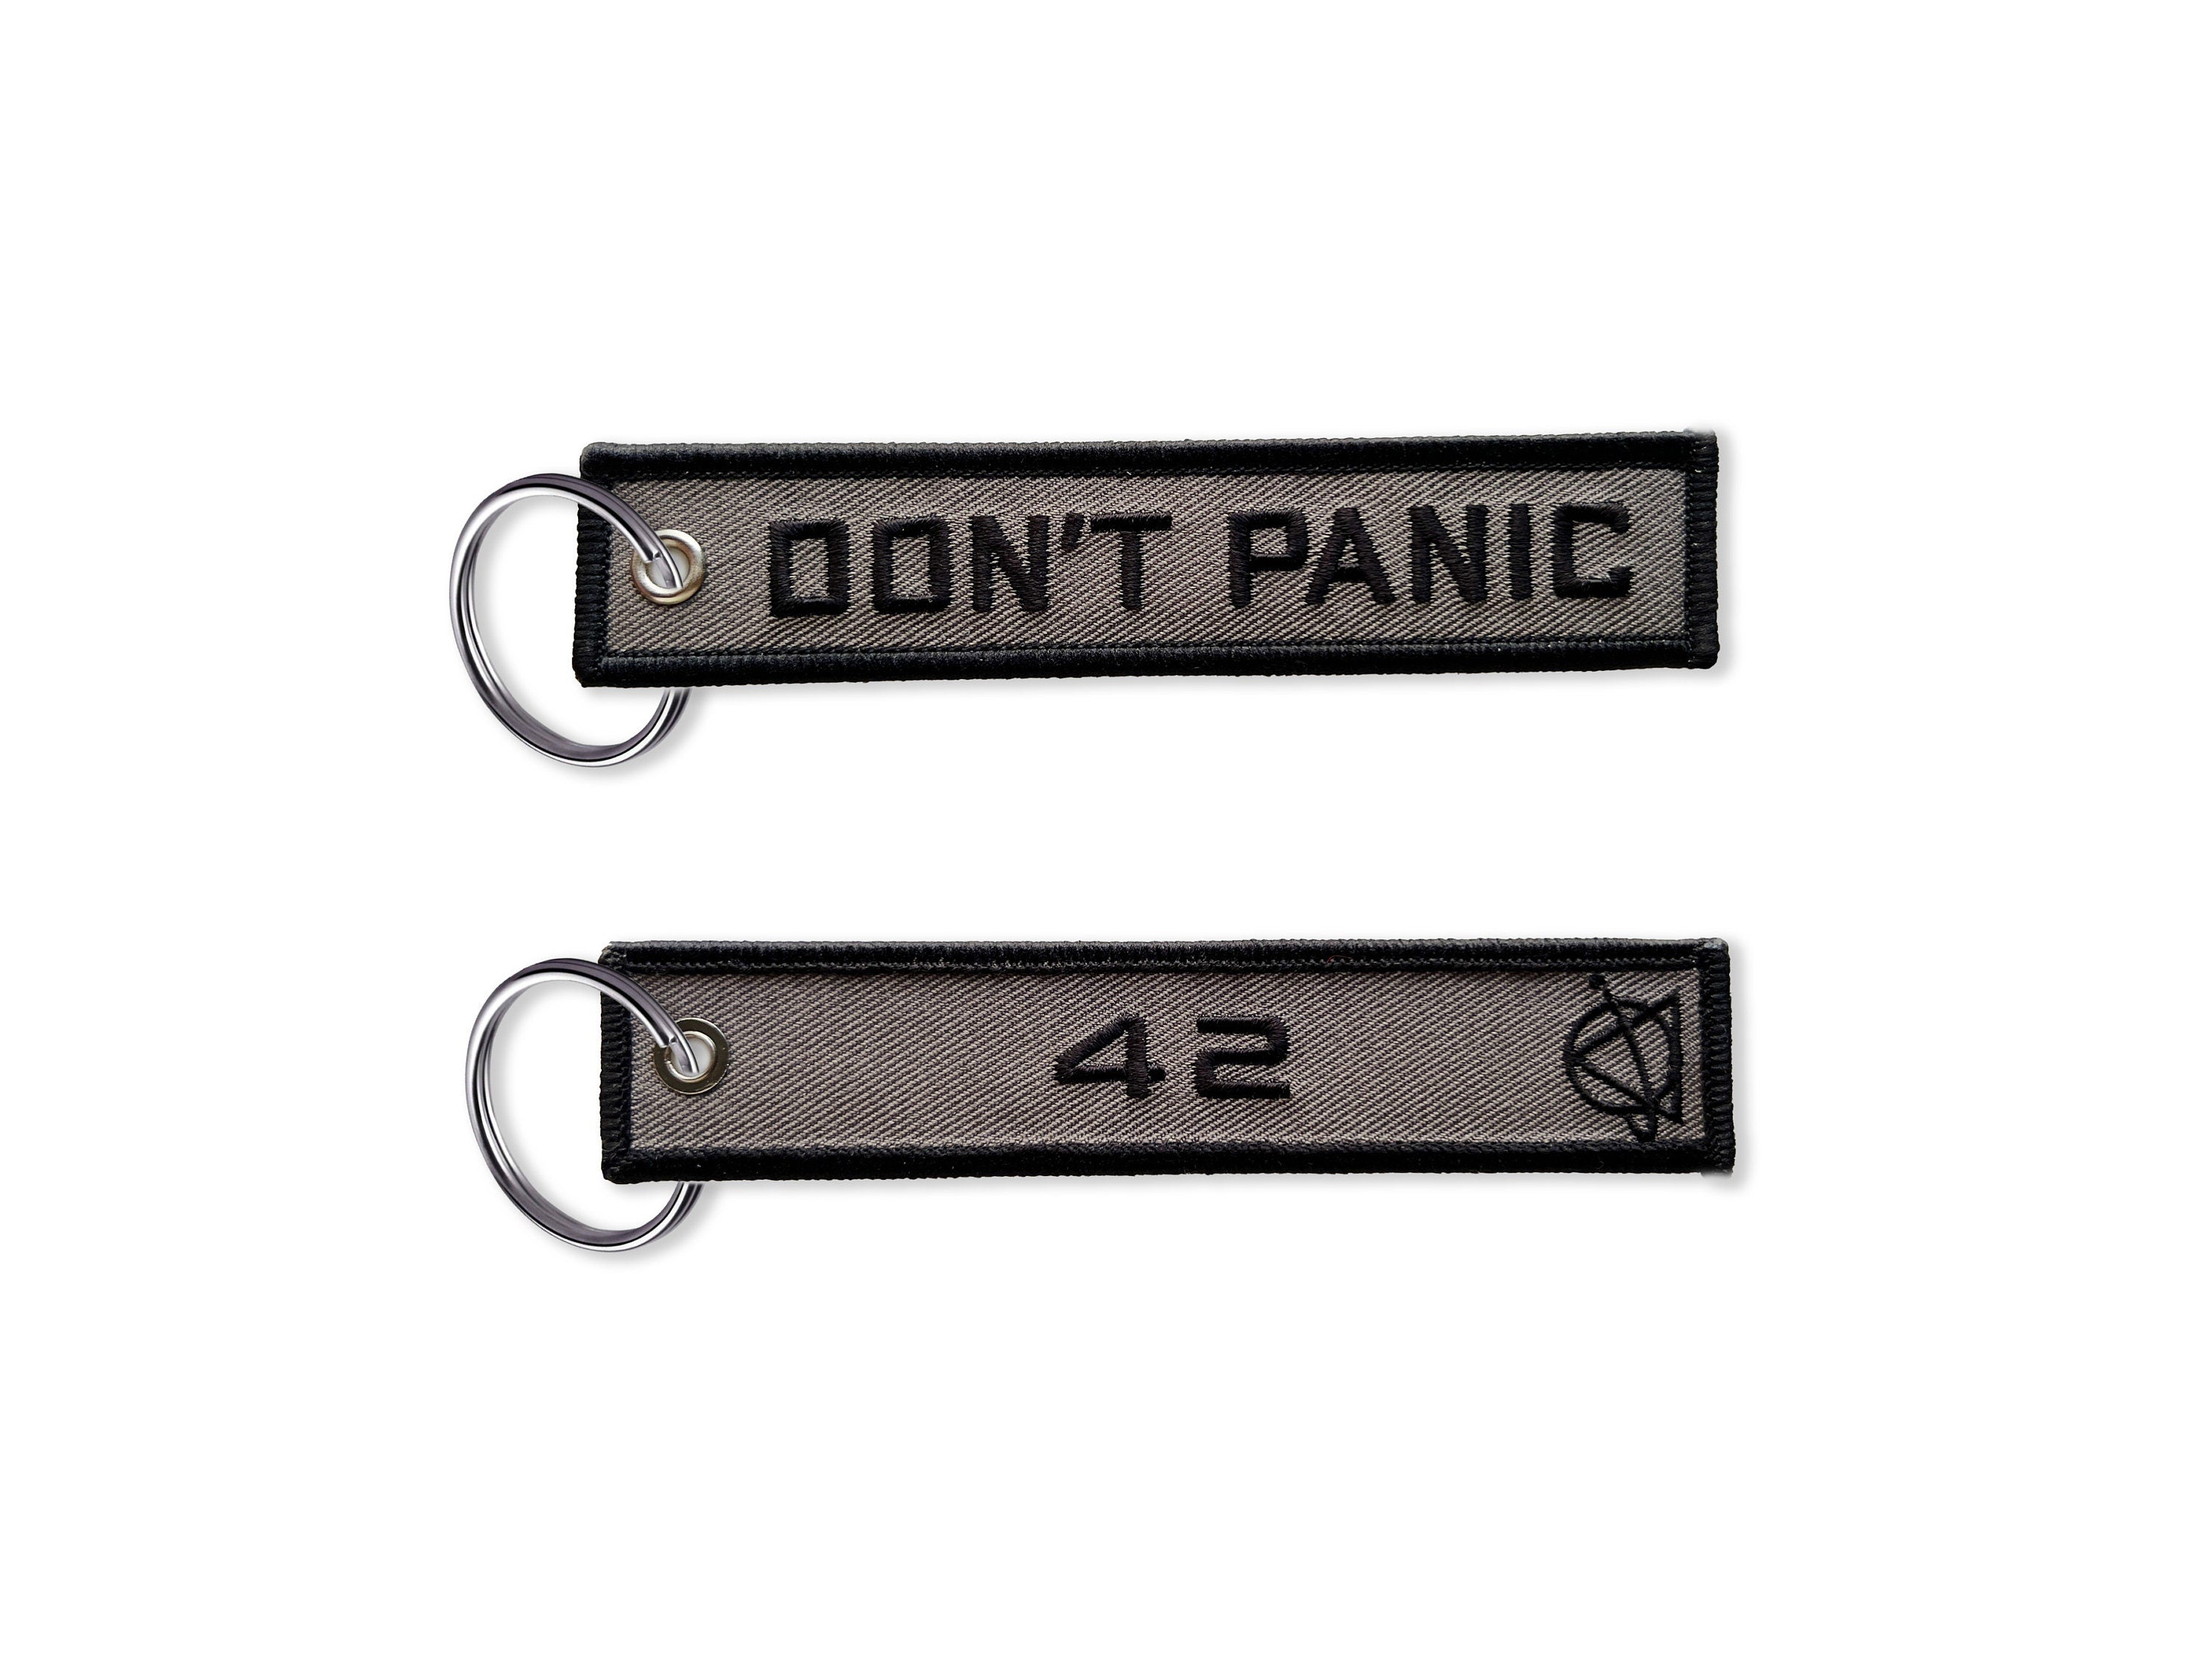 Don't Panic "Remove Before Flight" Keychain - Hitchhiker's Guide EDC Keychain / Sci-Fi Geek Gift